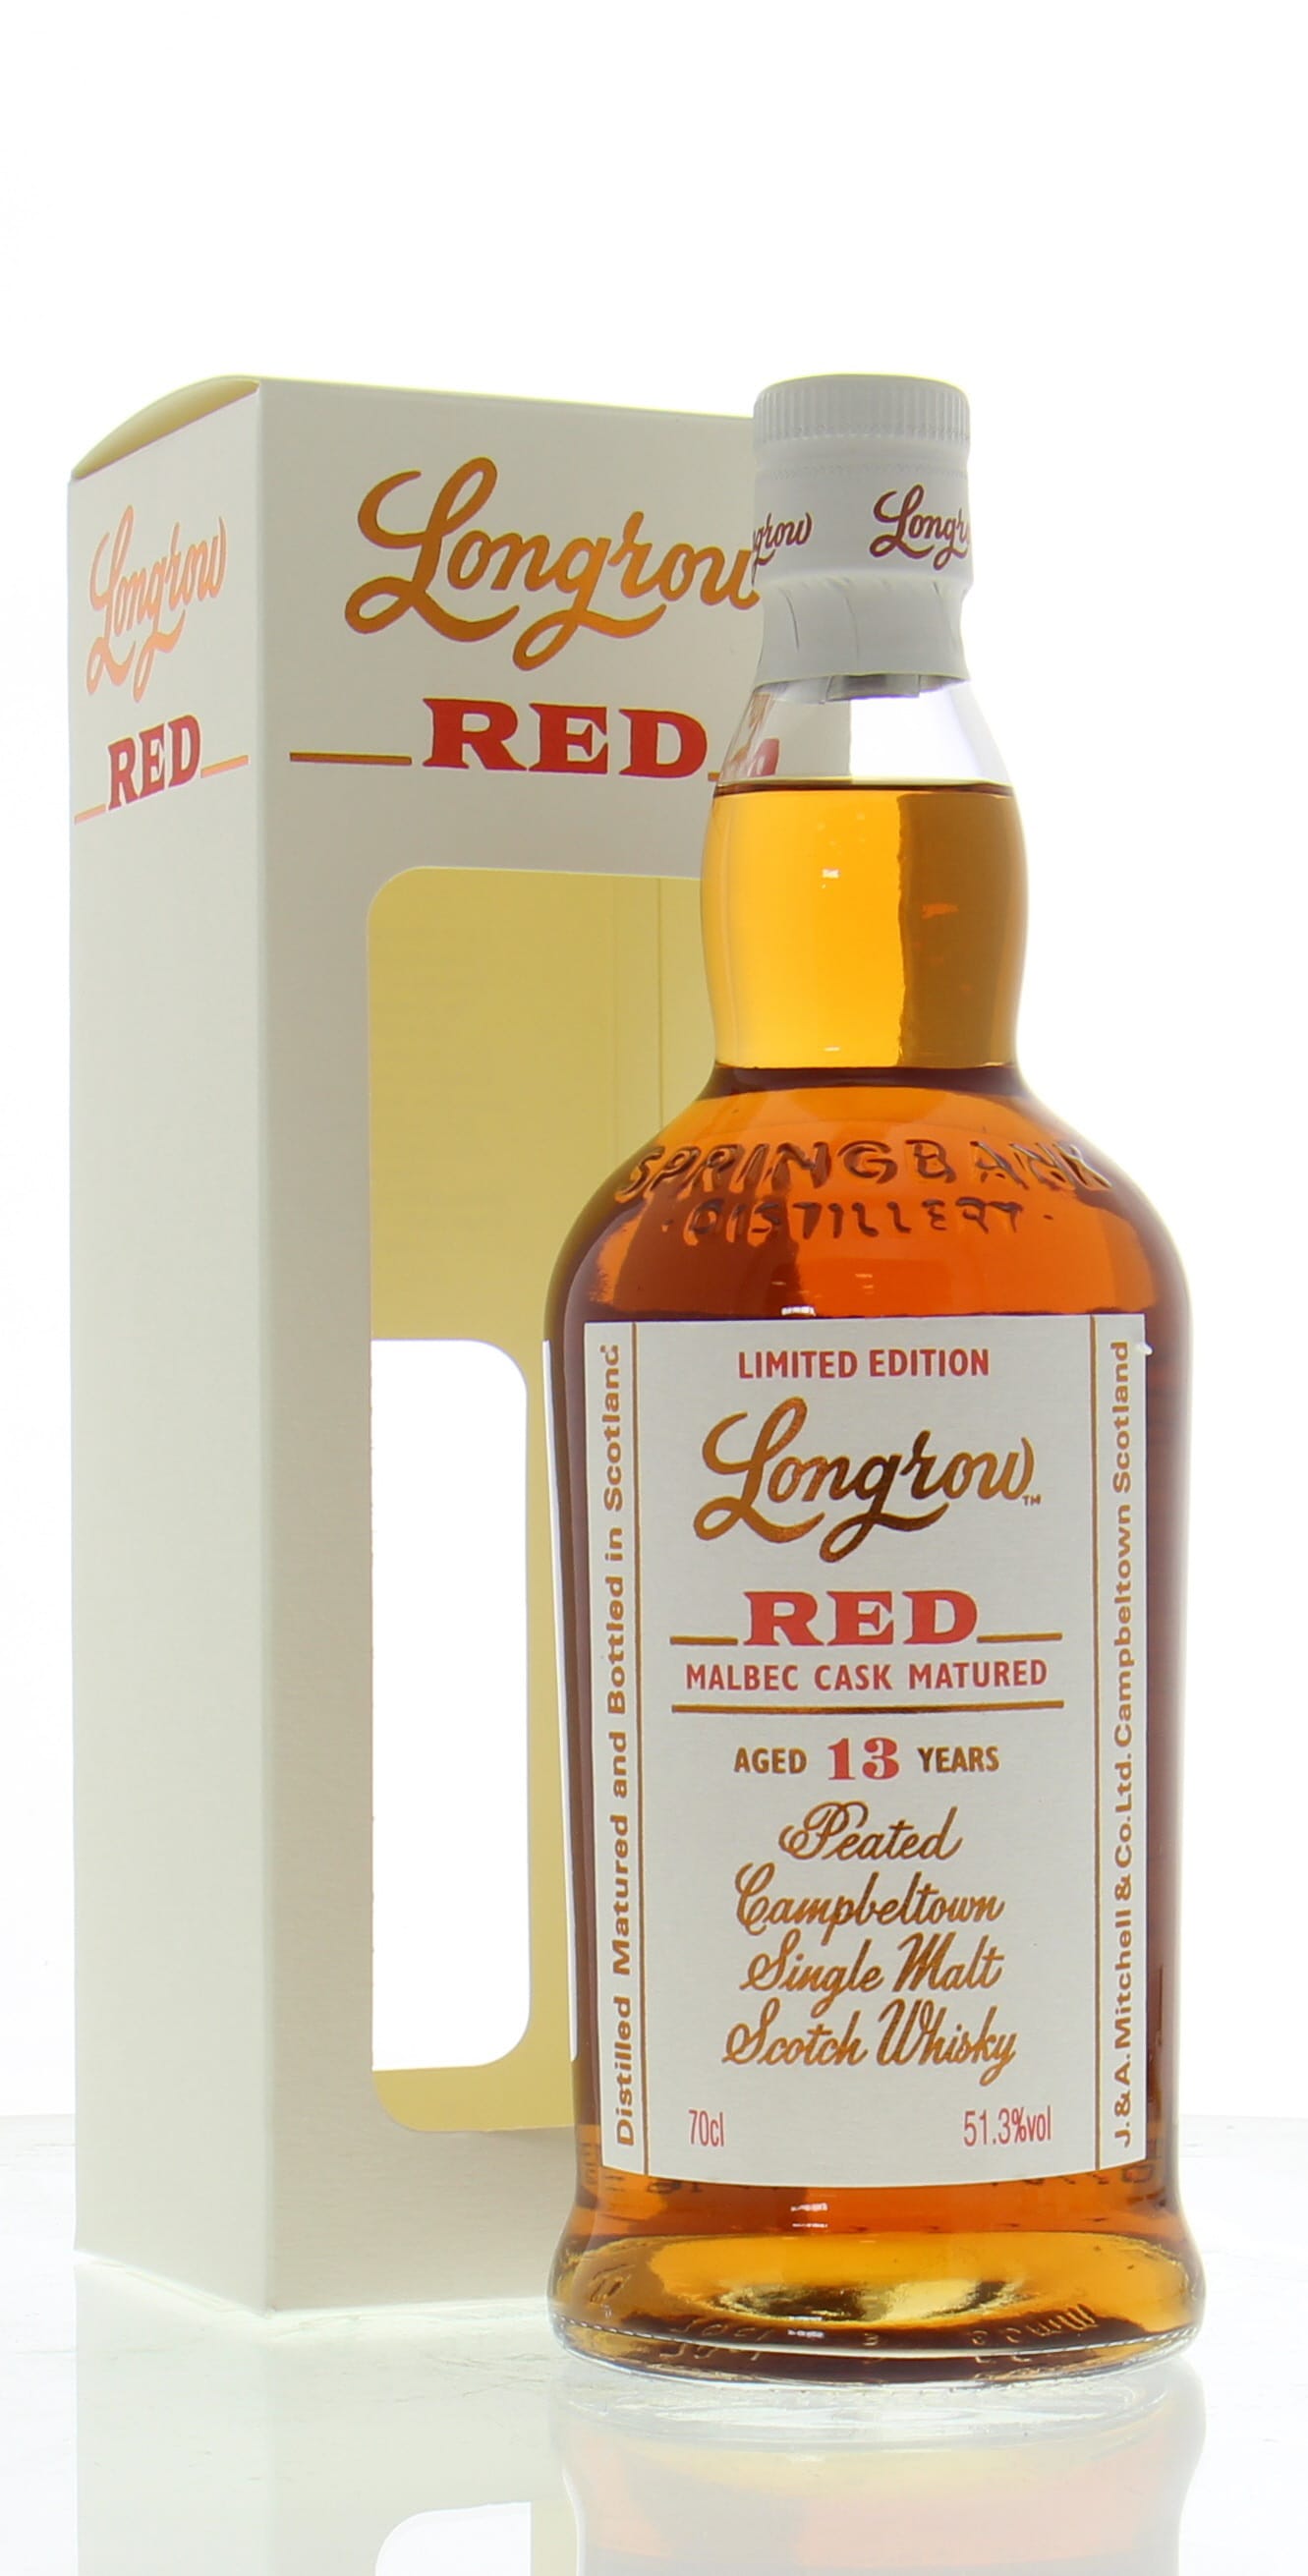 Longrow - 13 years Old Red Malbec 51.3% 2003